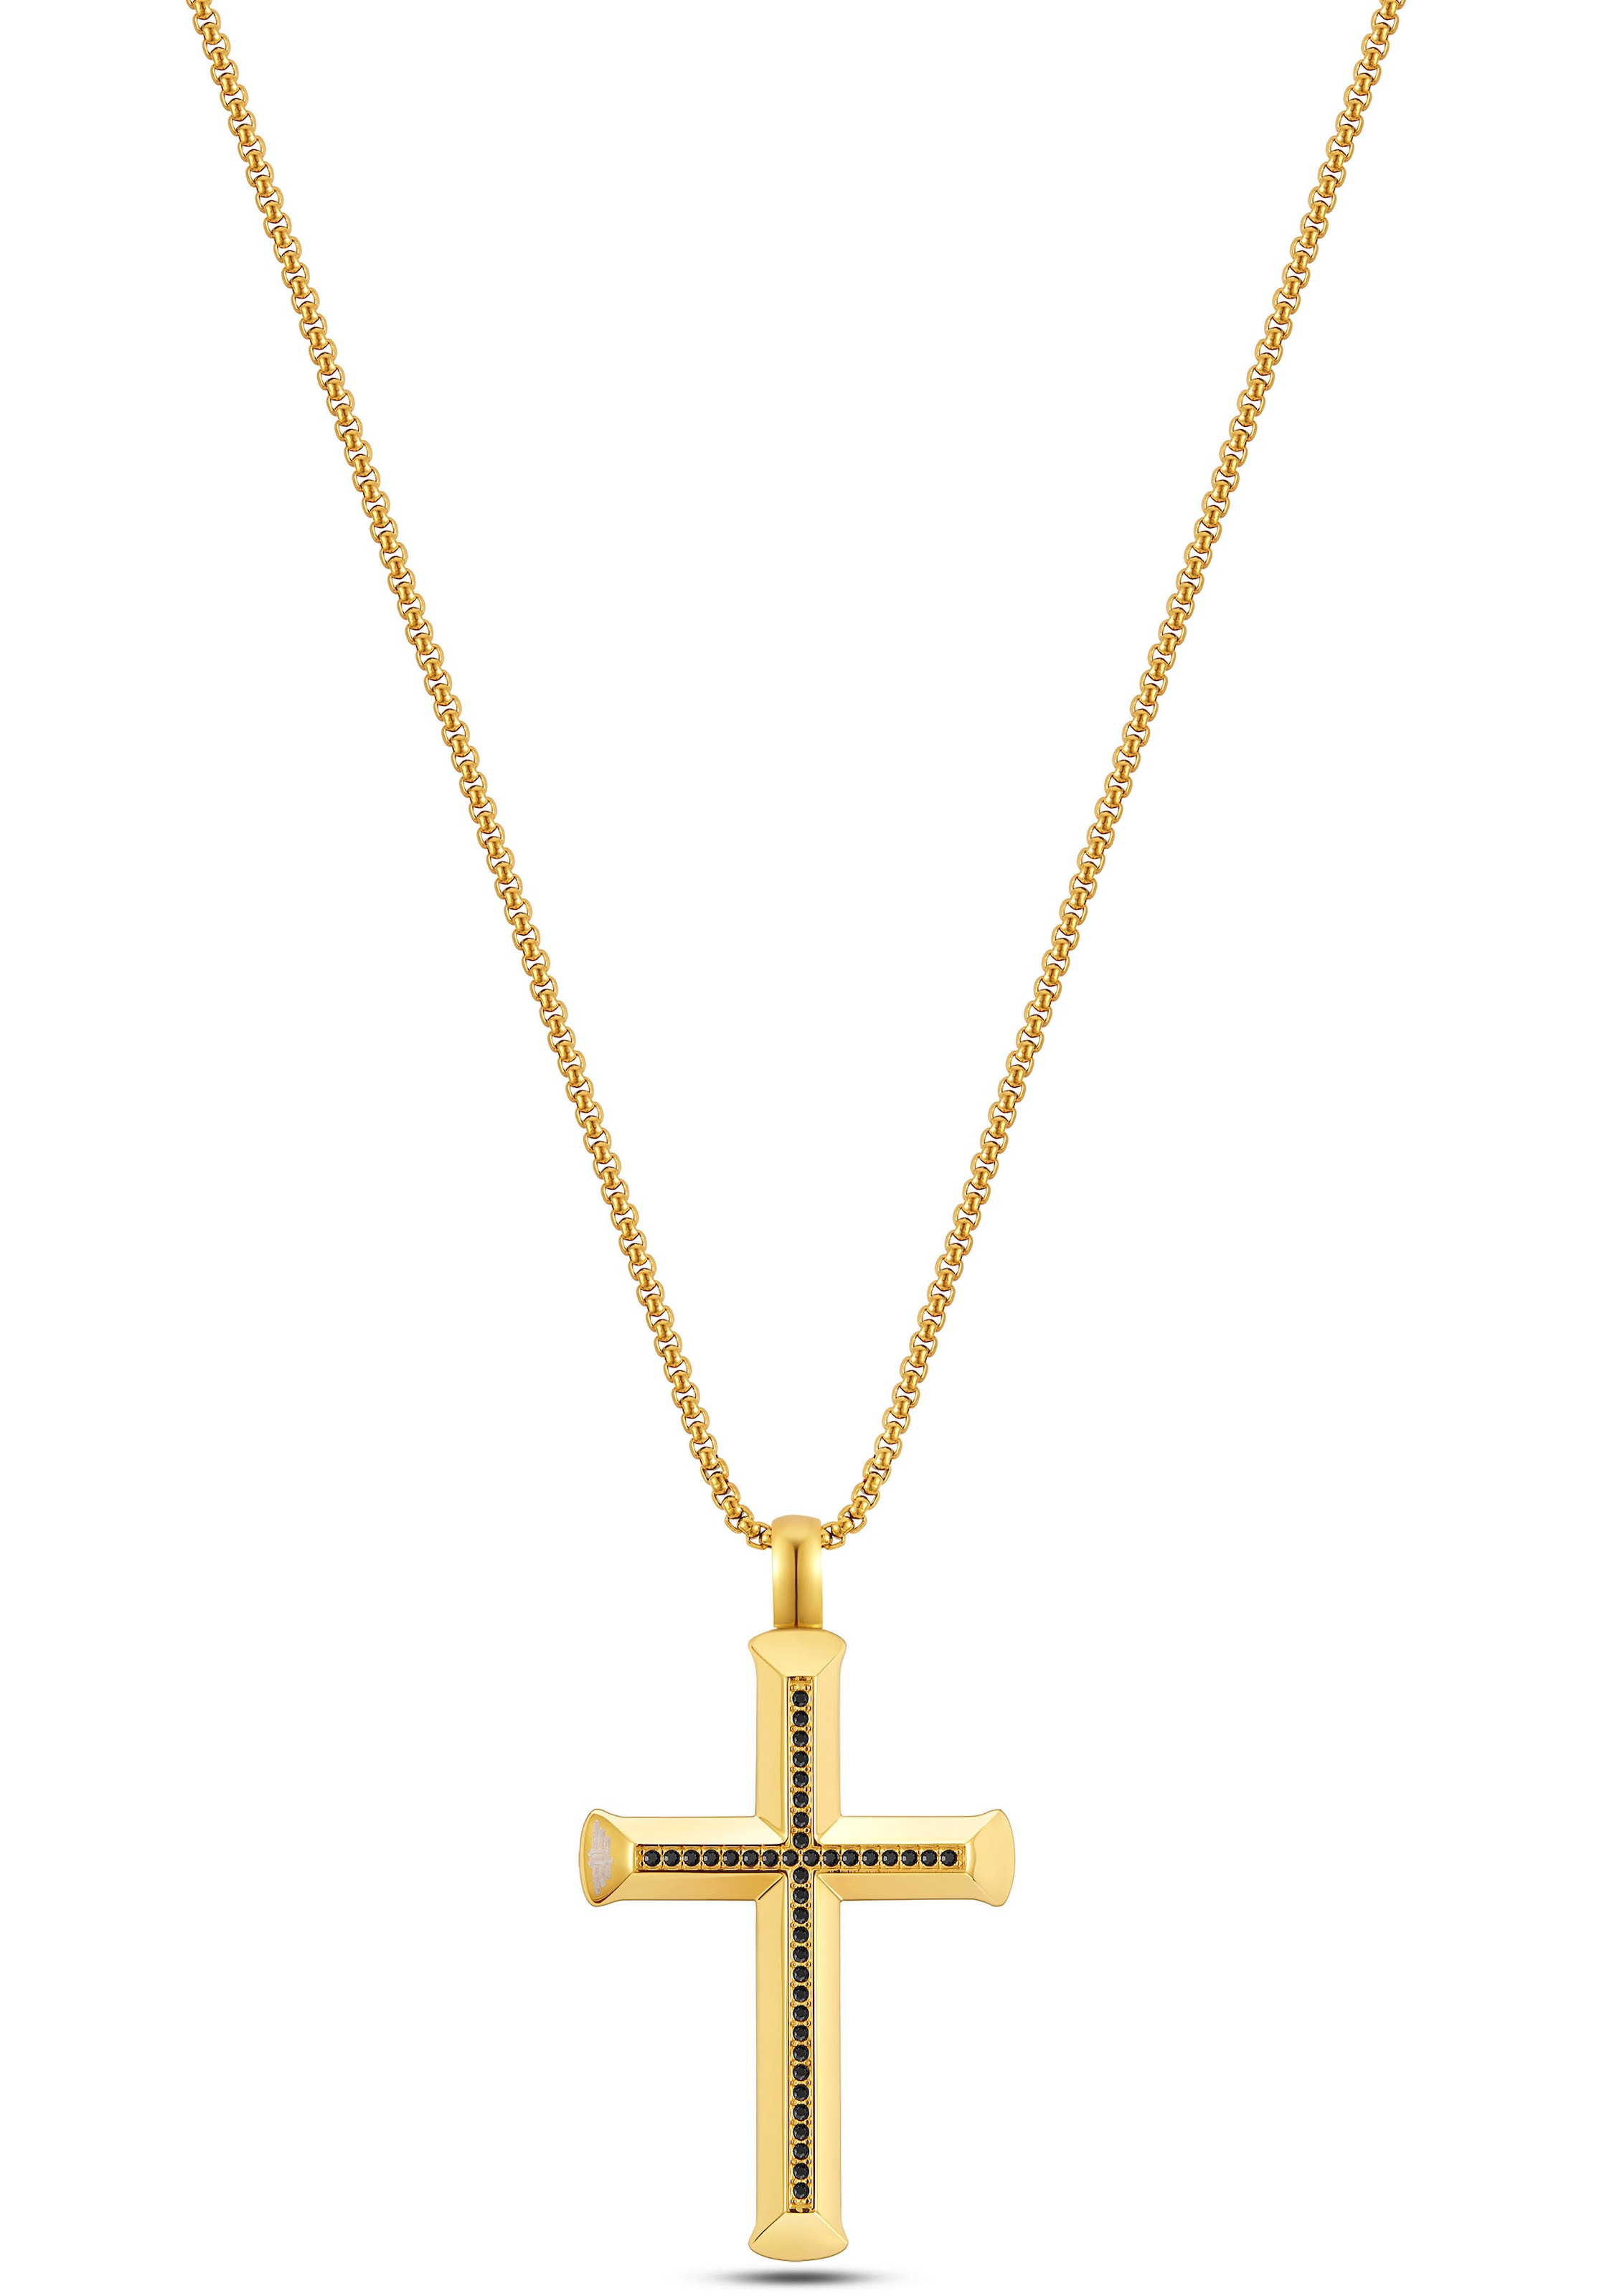 ♕ bei Kette Anhänger Police »GEOMETRIC PEAGN0001405/-07« METAL, mit